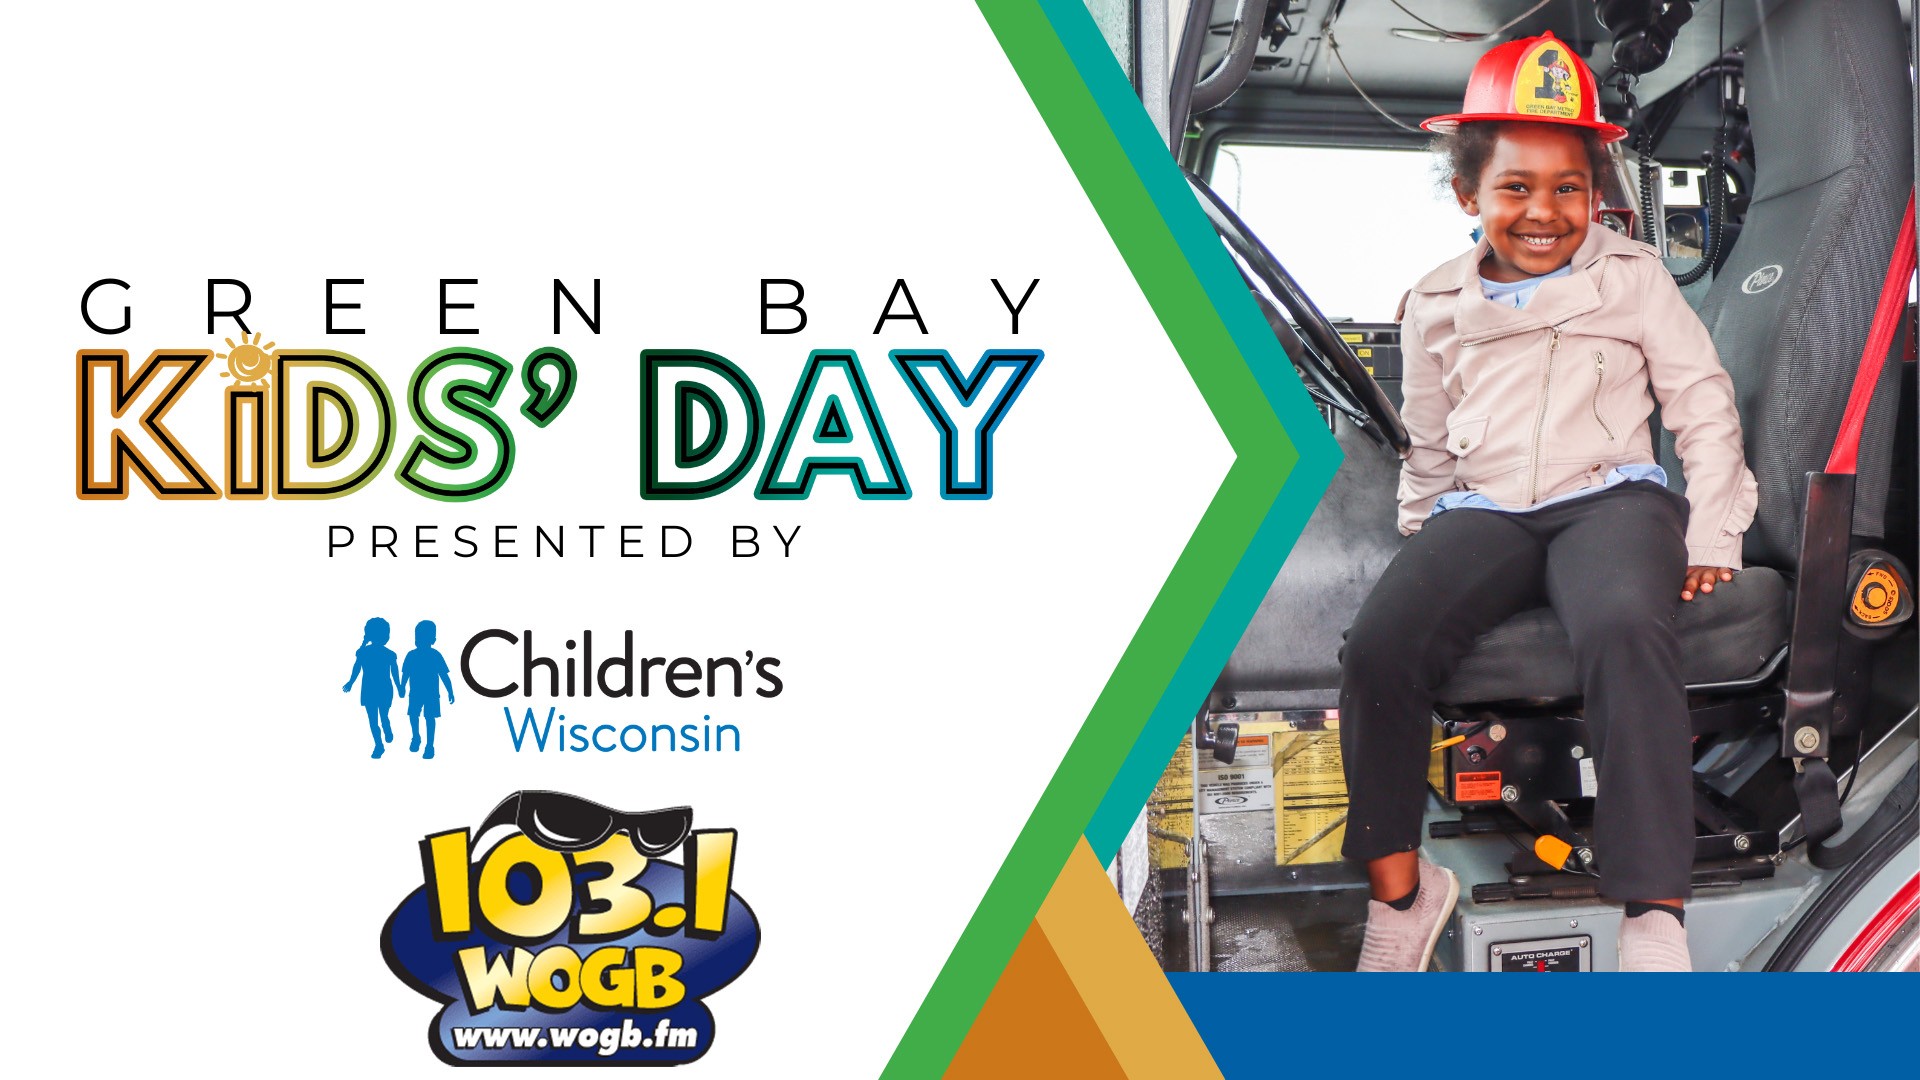 Join WOGB for the 22nd Annual Green Bay Kids’ Day Tuesday, June 25th!!